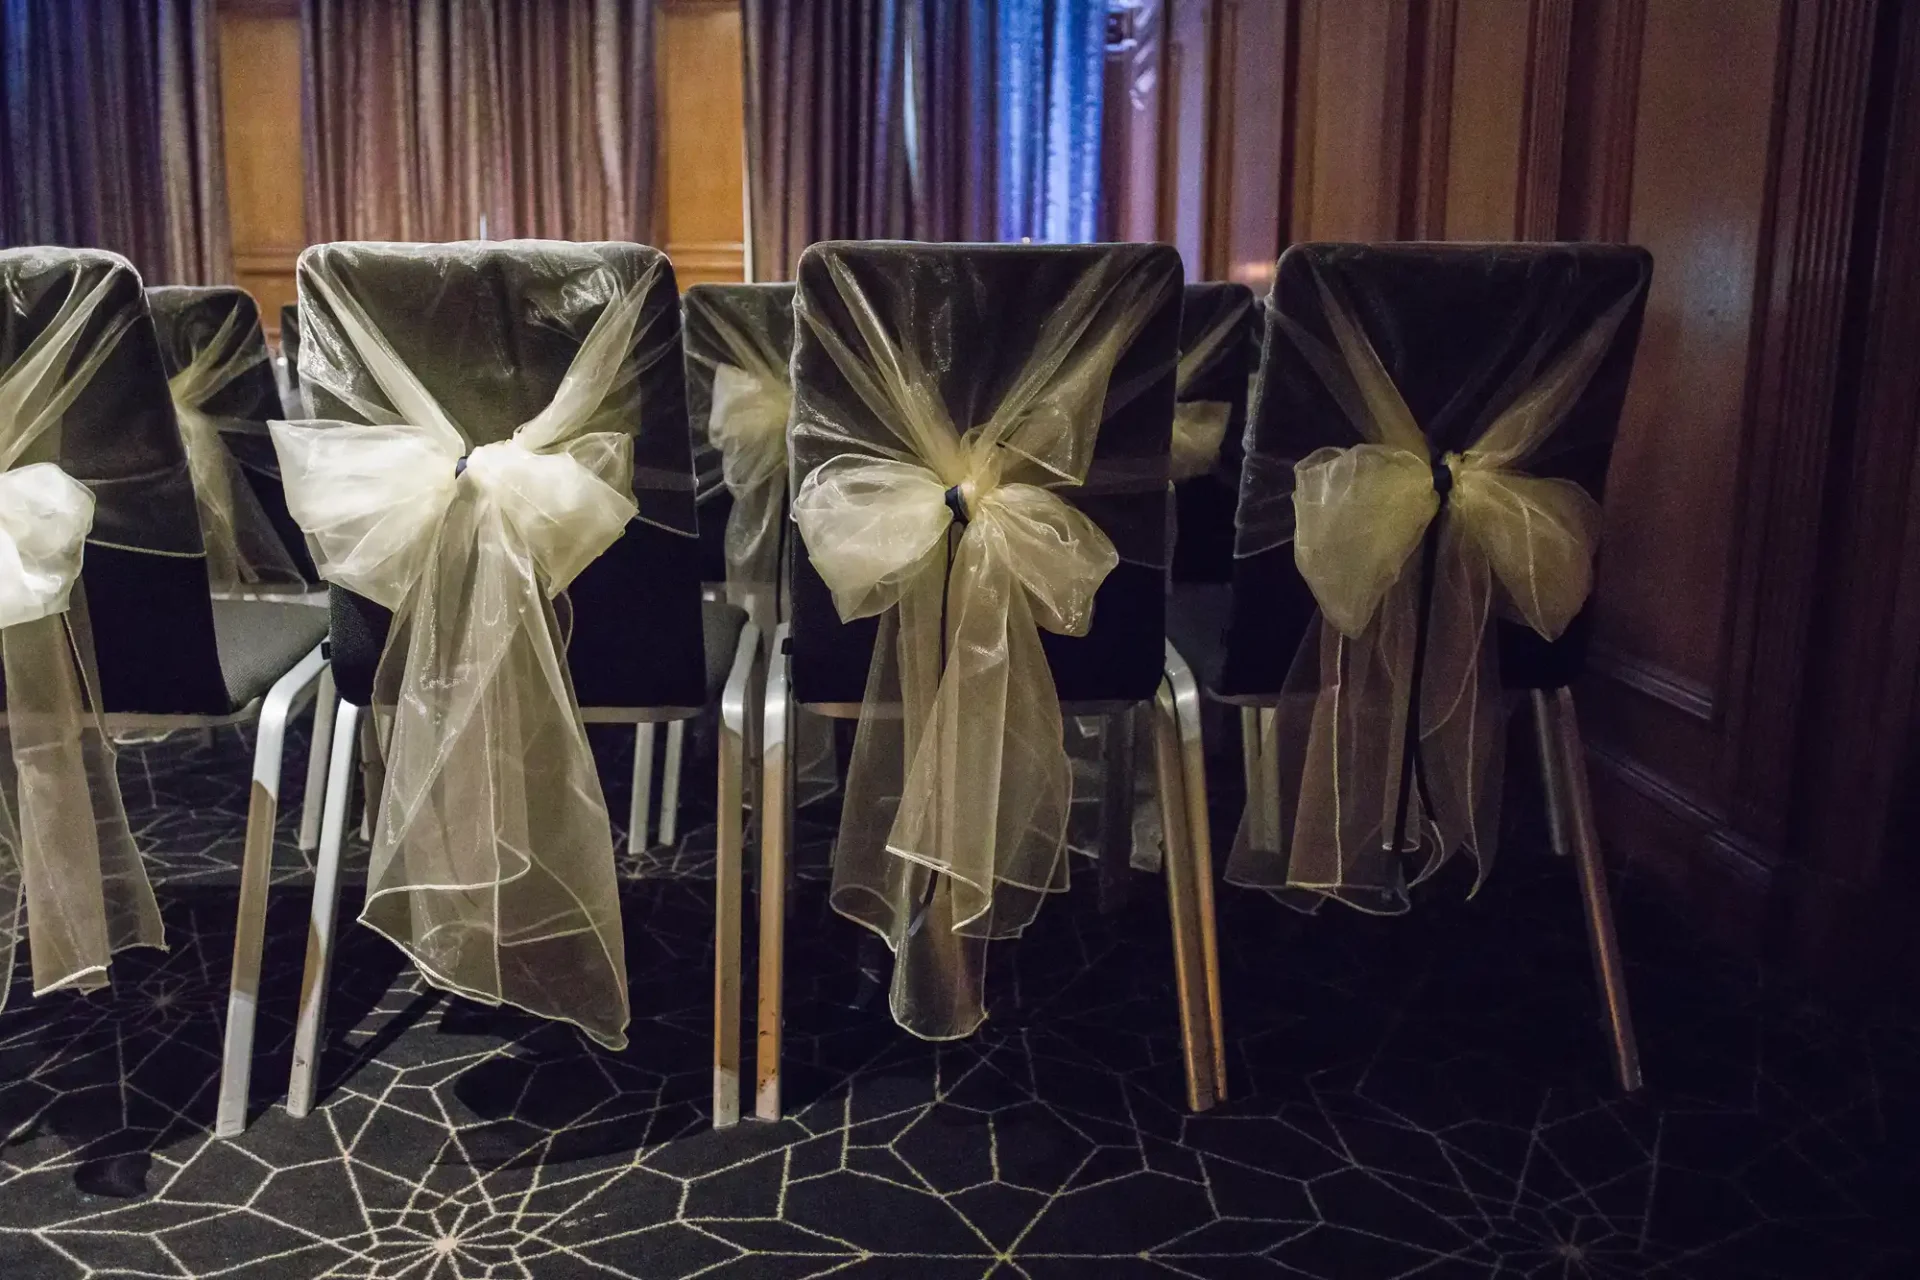 Rows of chairs covered with black fabric and decorated with white sheer bows in a dimly lit room.